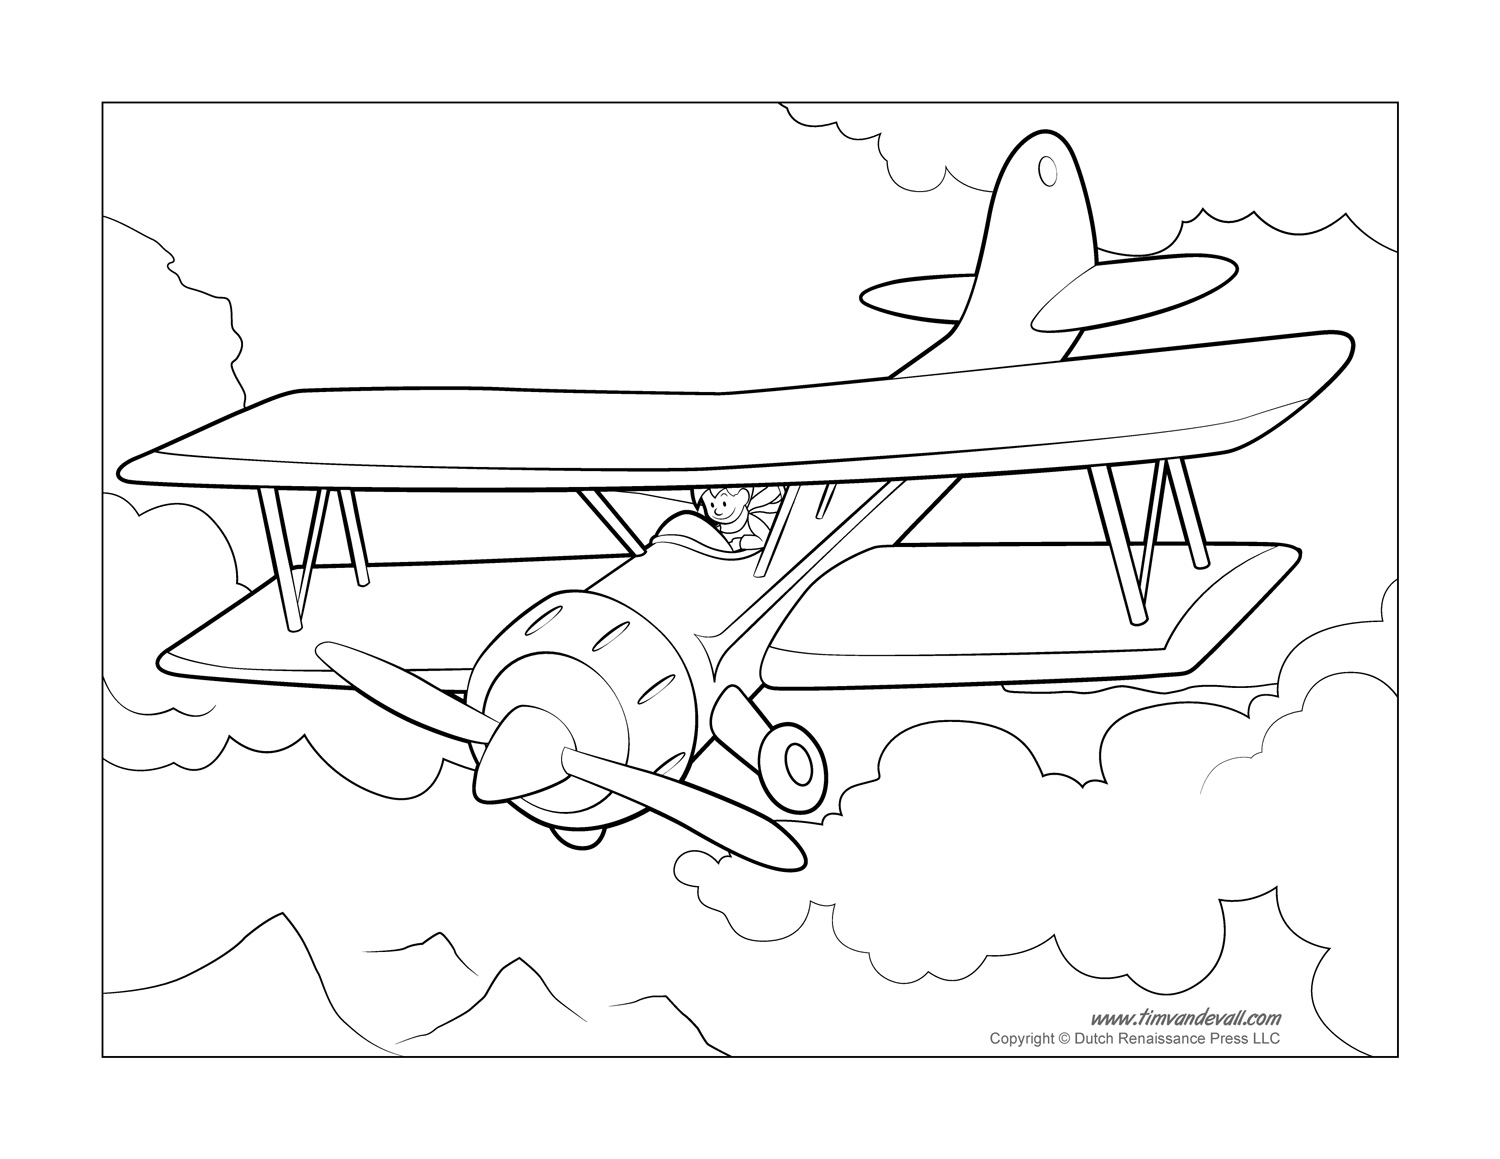 airplane taking off coloring page image